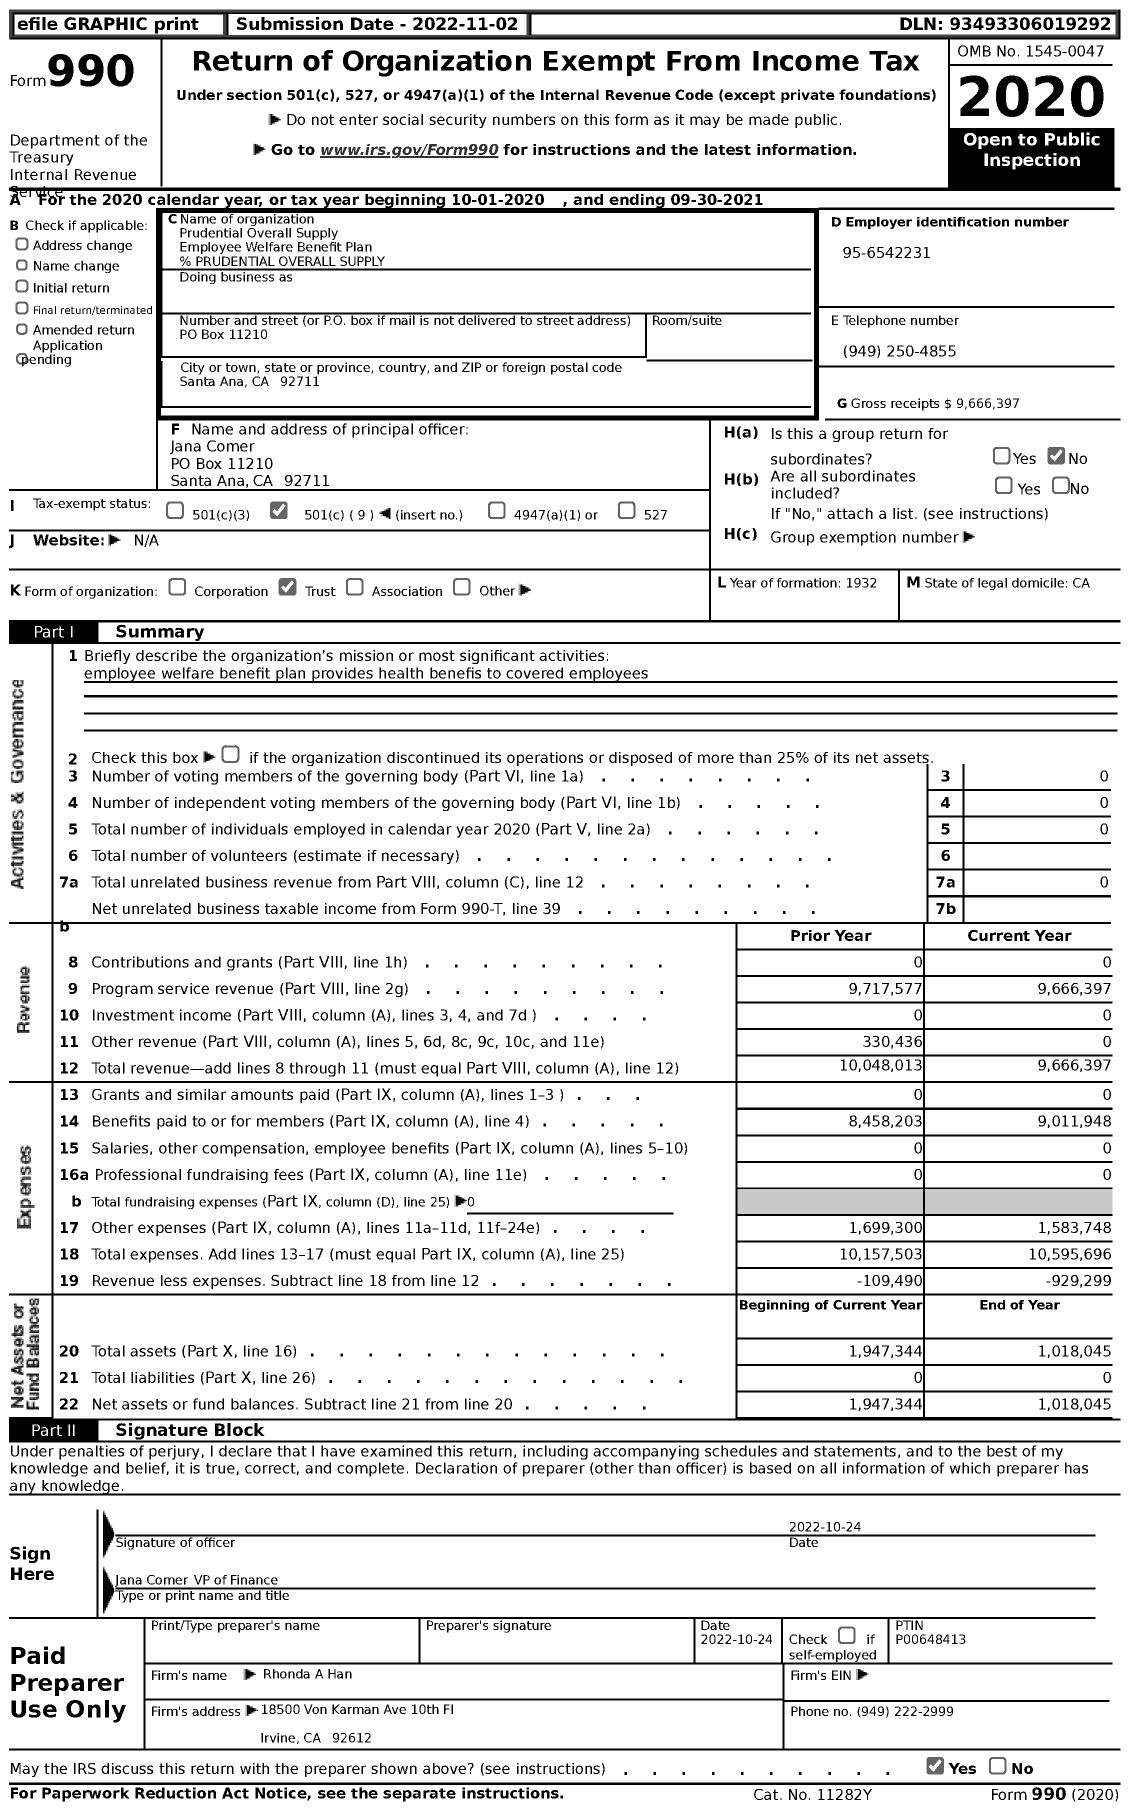 Image of first page of 2020 Form 990 for Prudential Overall Supply Employee Welfare Benefit Plan